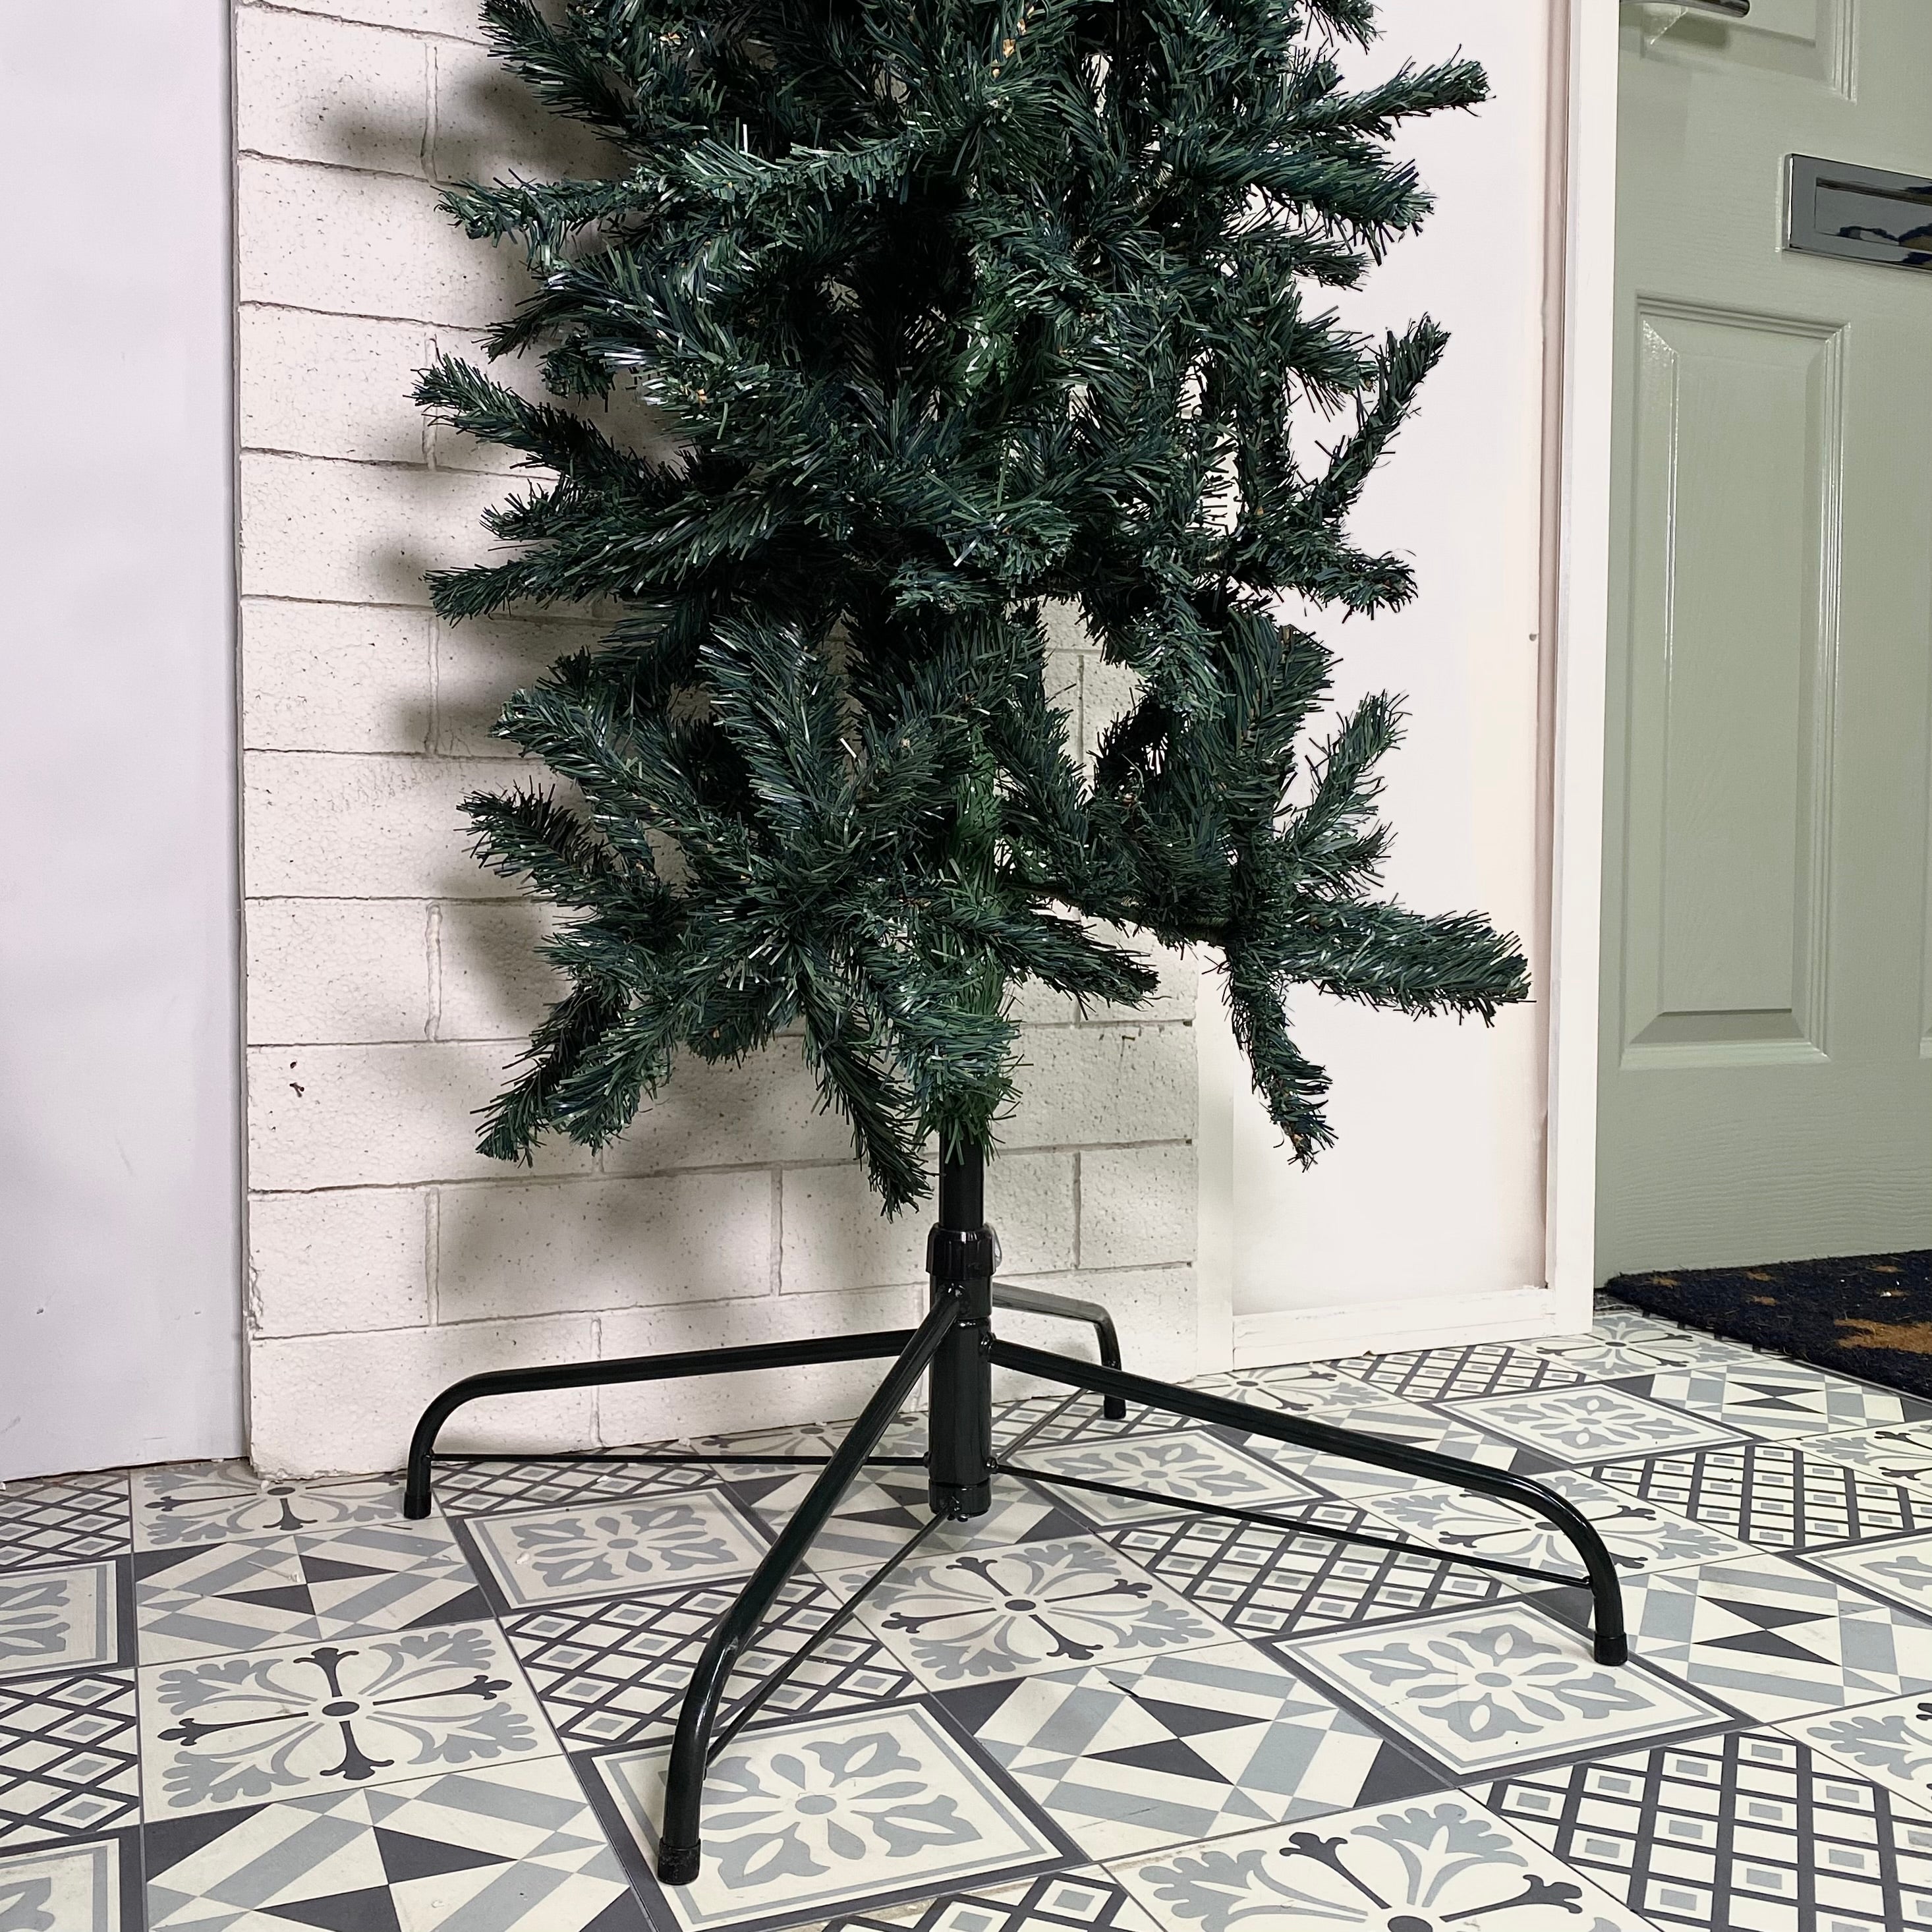 8ft (2.4m) Indoor Outdoor Artificial Christmas Tree Arch in Green